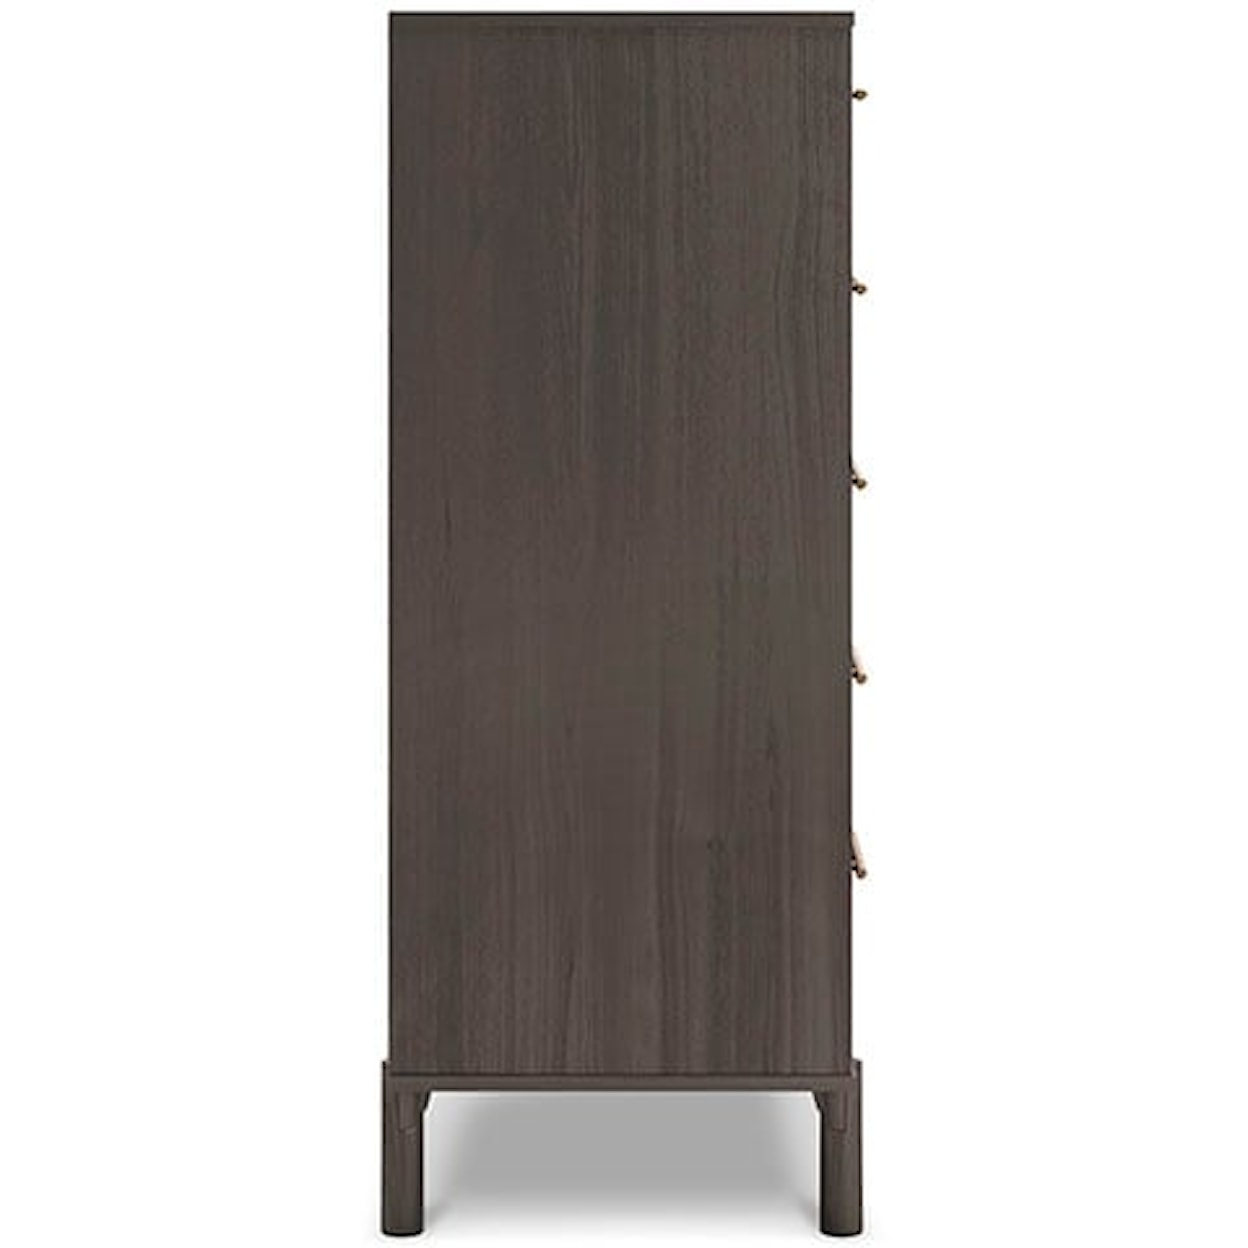 Ashley Furniture Signature Design Brymont Chest of Drawers